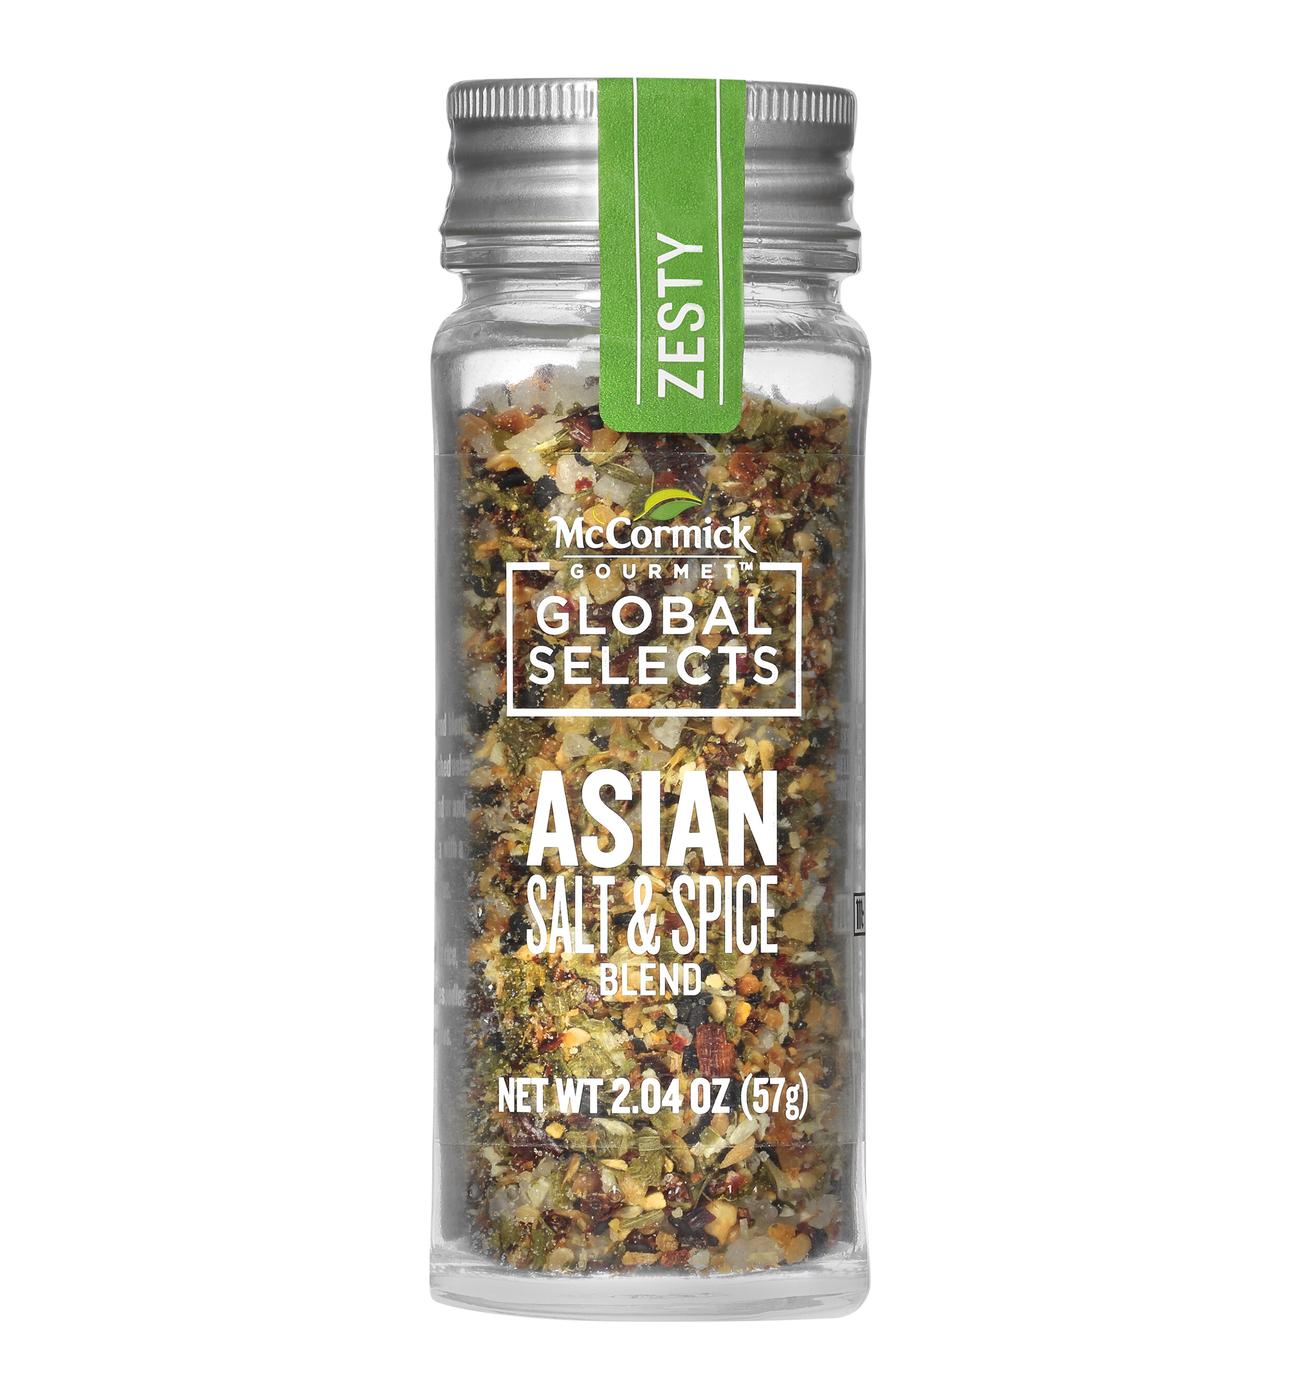 McCormick Gourmet Global Selects Asian Salt & Spice Blend; image 1 of 9